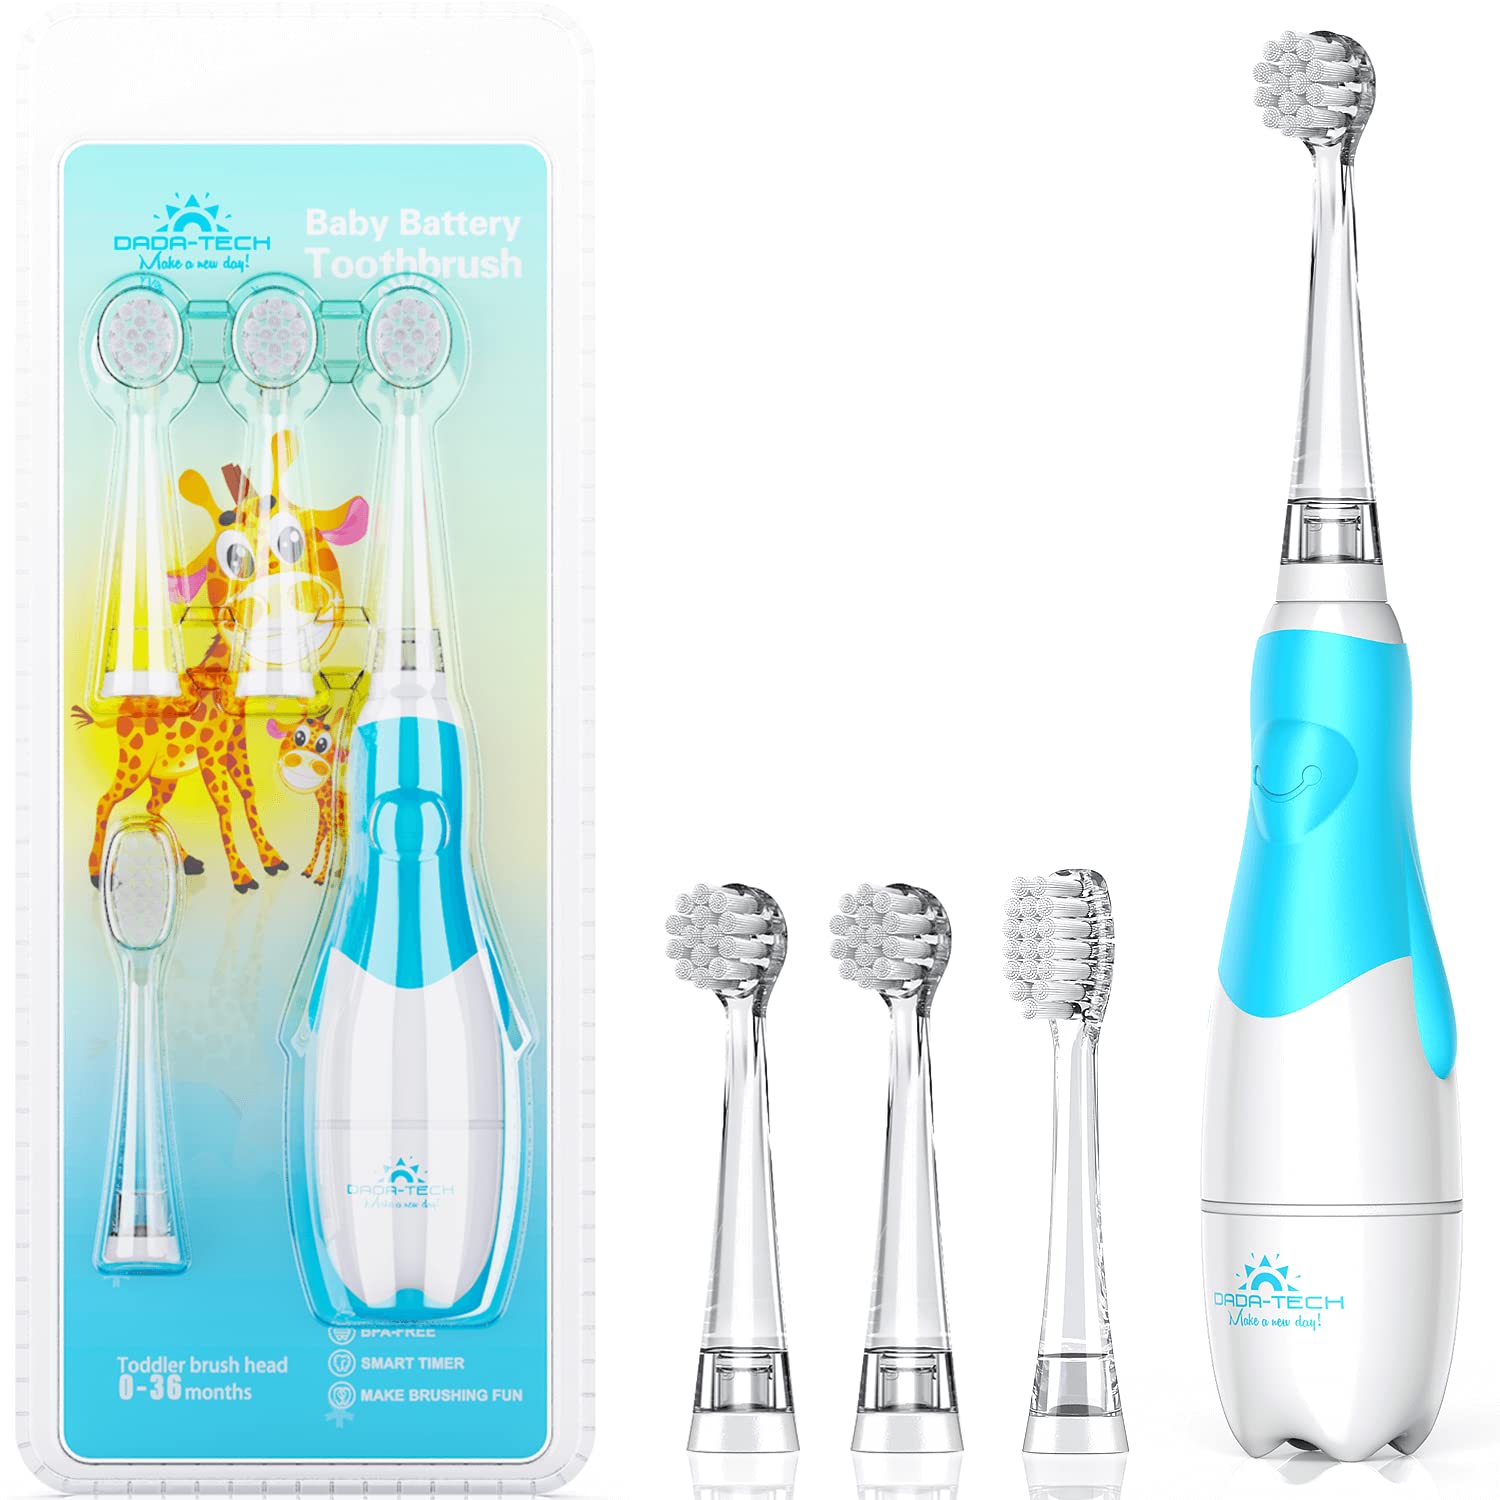 DADA-TECH Baby Electric Toothbrush Blue Ages 0-3 Years, Sonic Toothbrush Blue for Adult and Kids